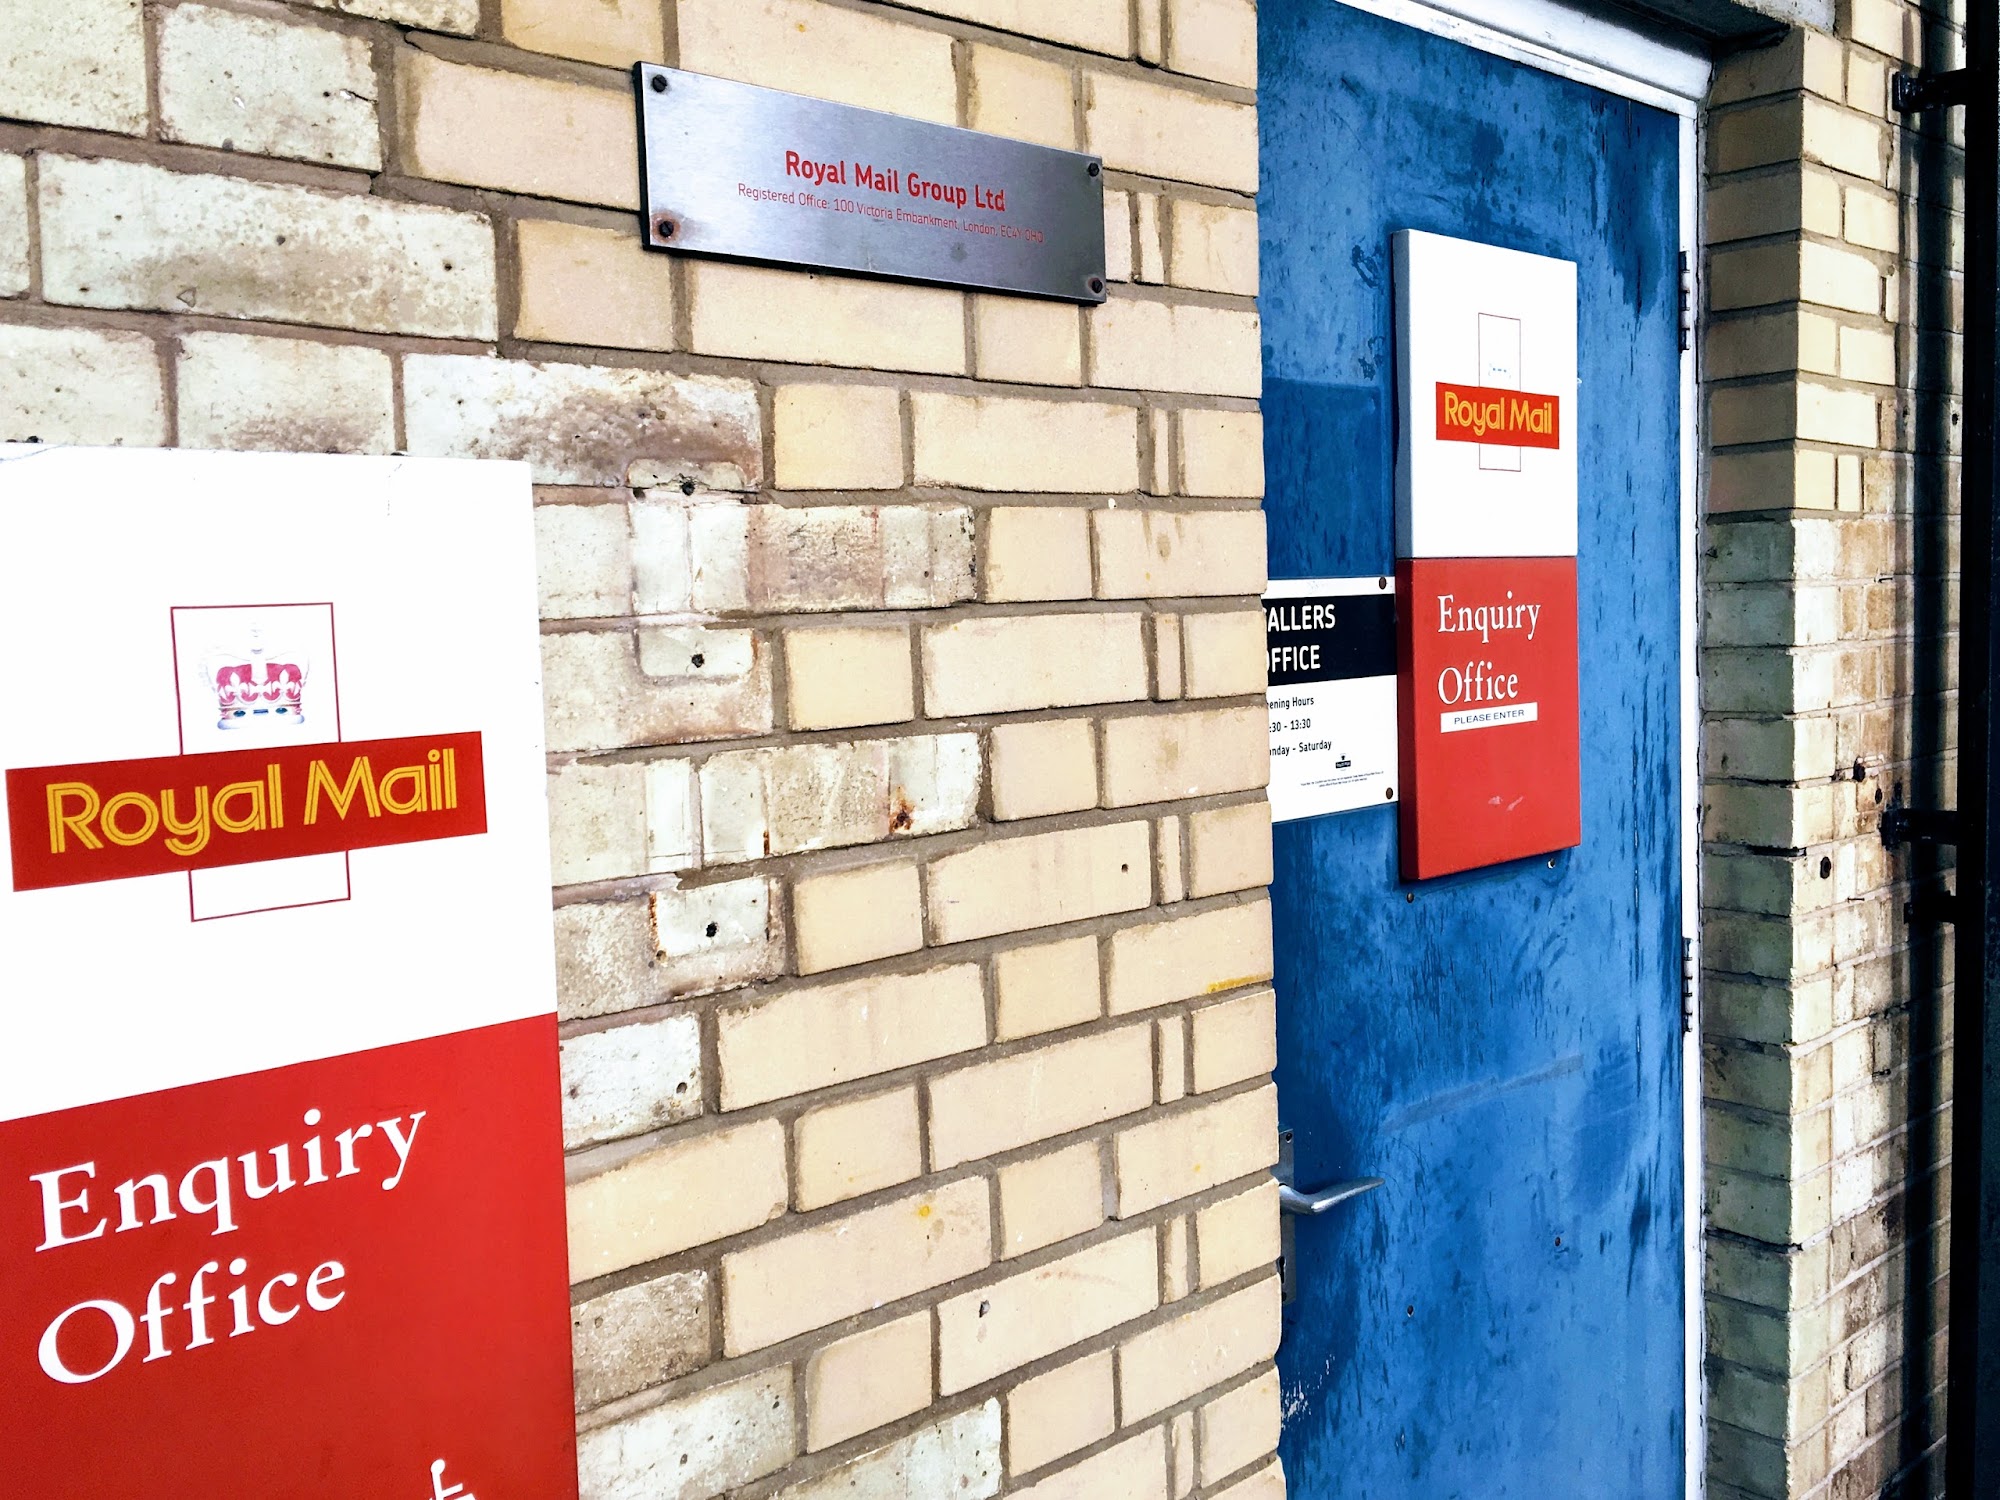 Royal Mail Calne Delivery Office